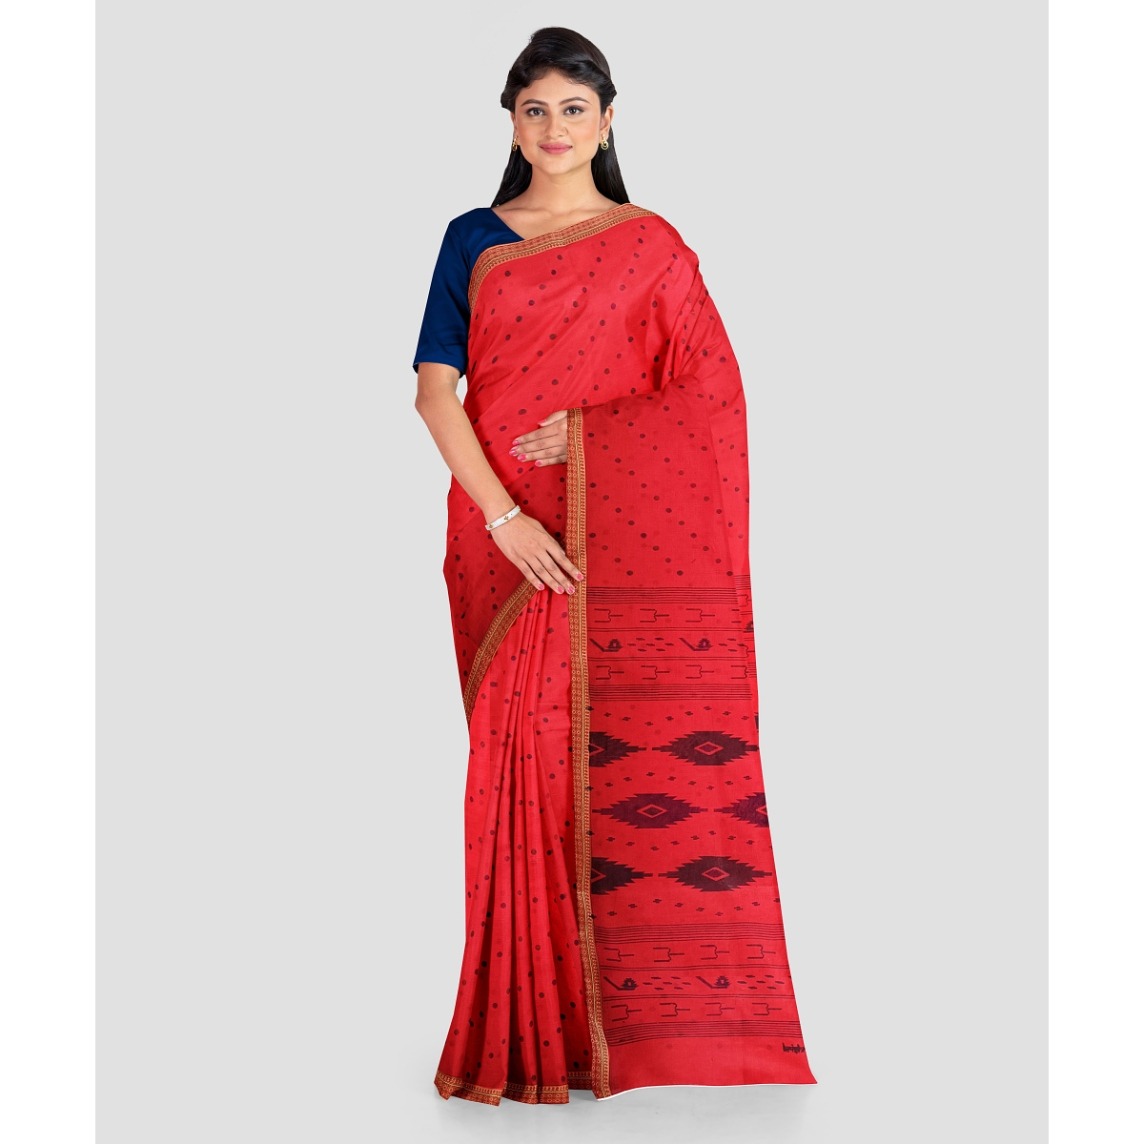 Woven Cotton Saree in Red : SPF9805